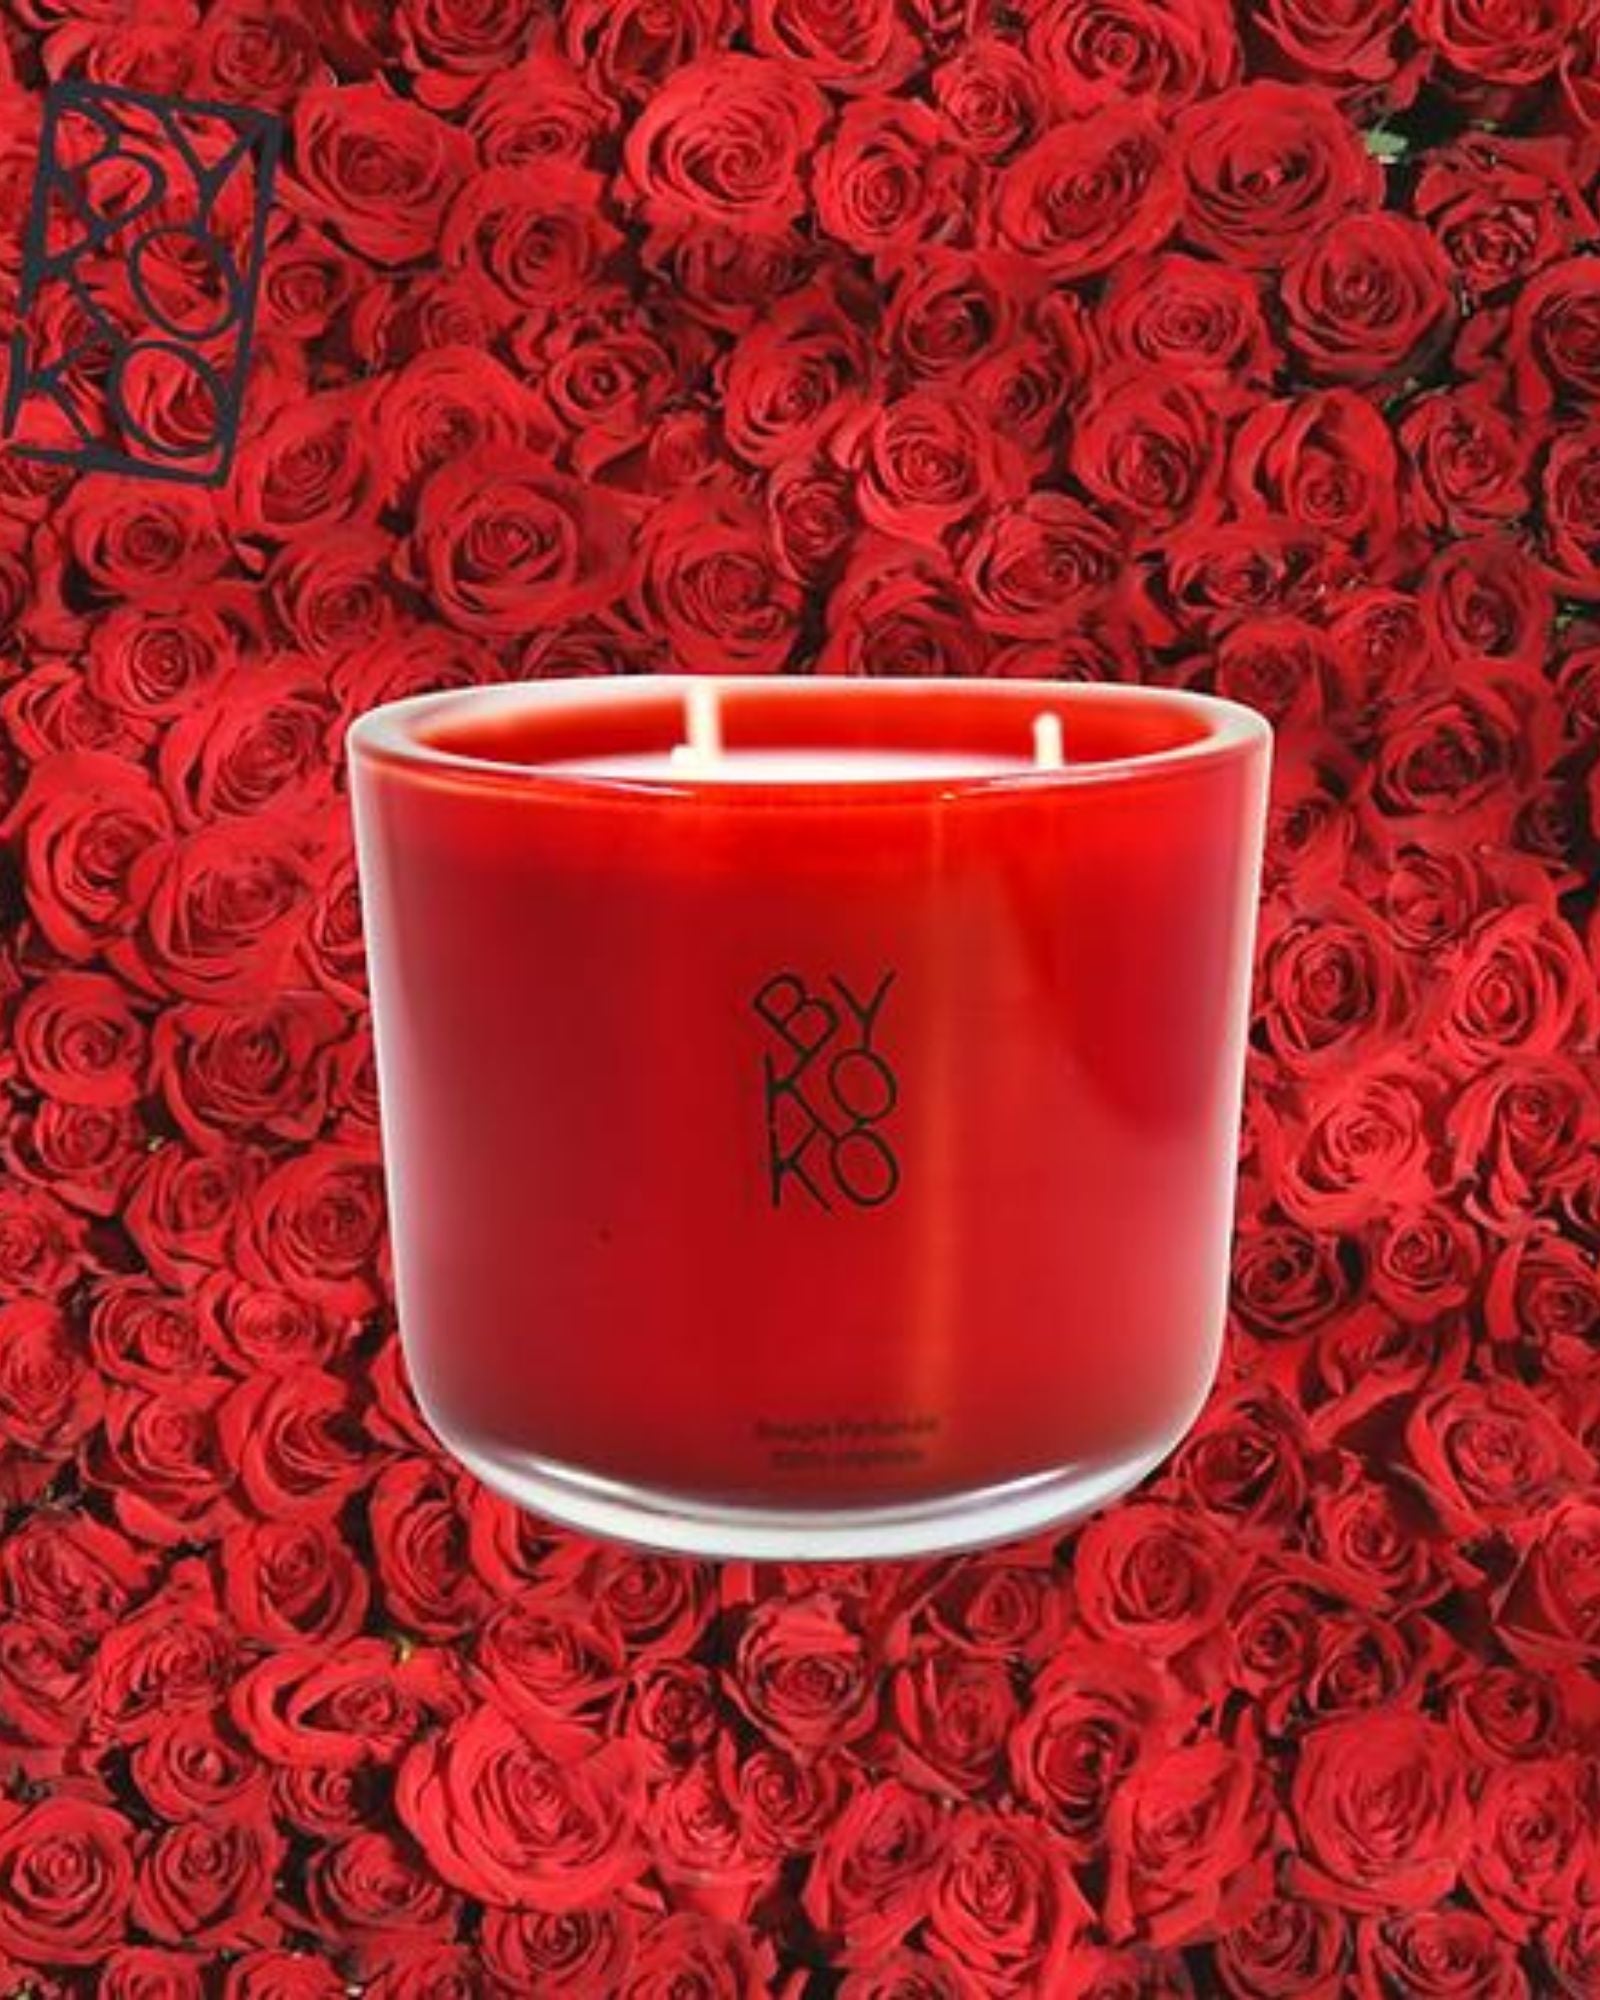 BYKOKO Large Candle Midnight in Paris in Red Glass Container.